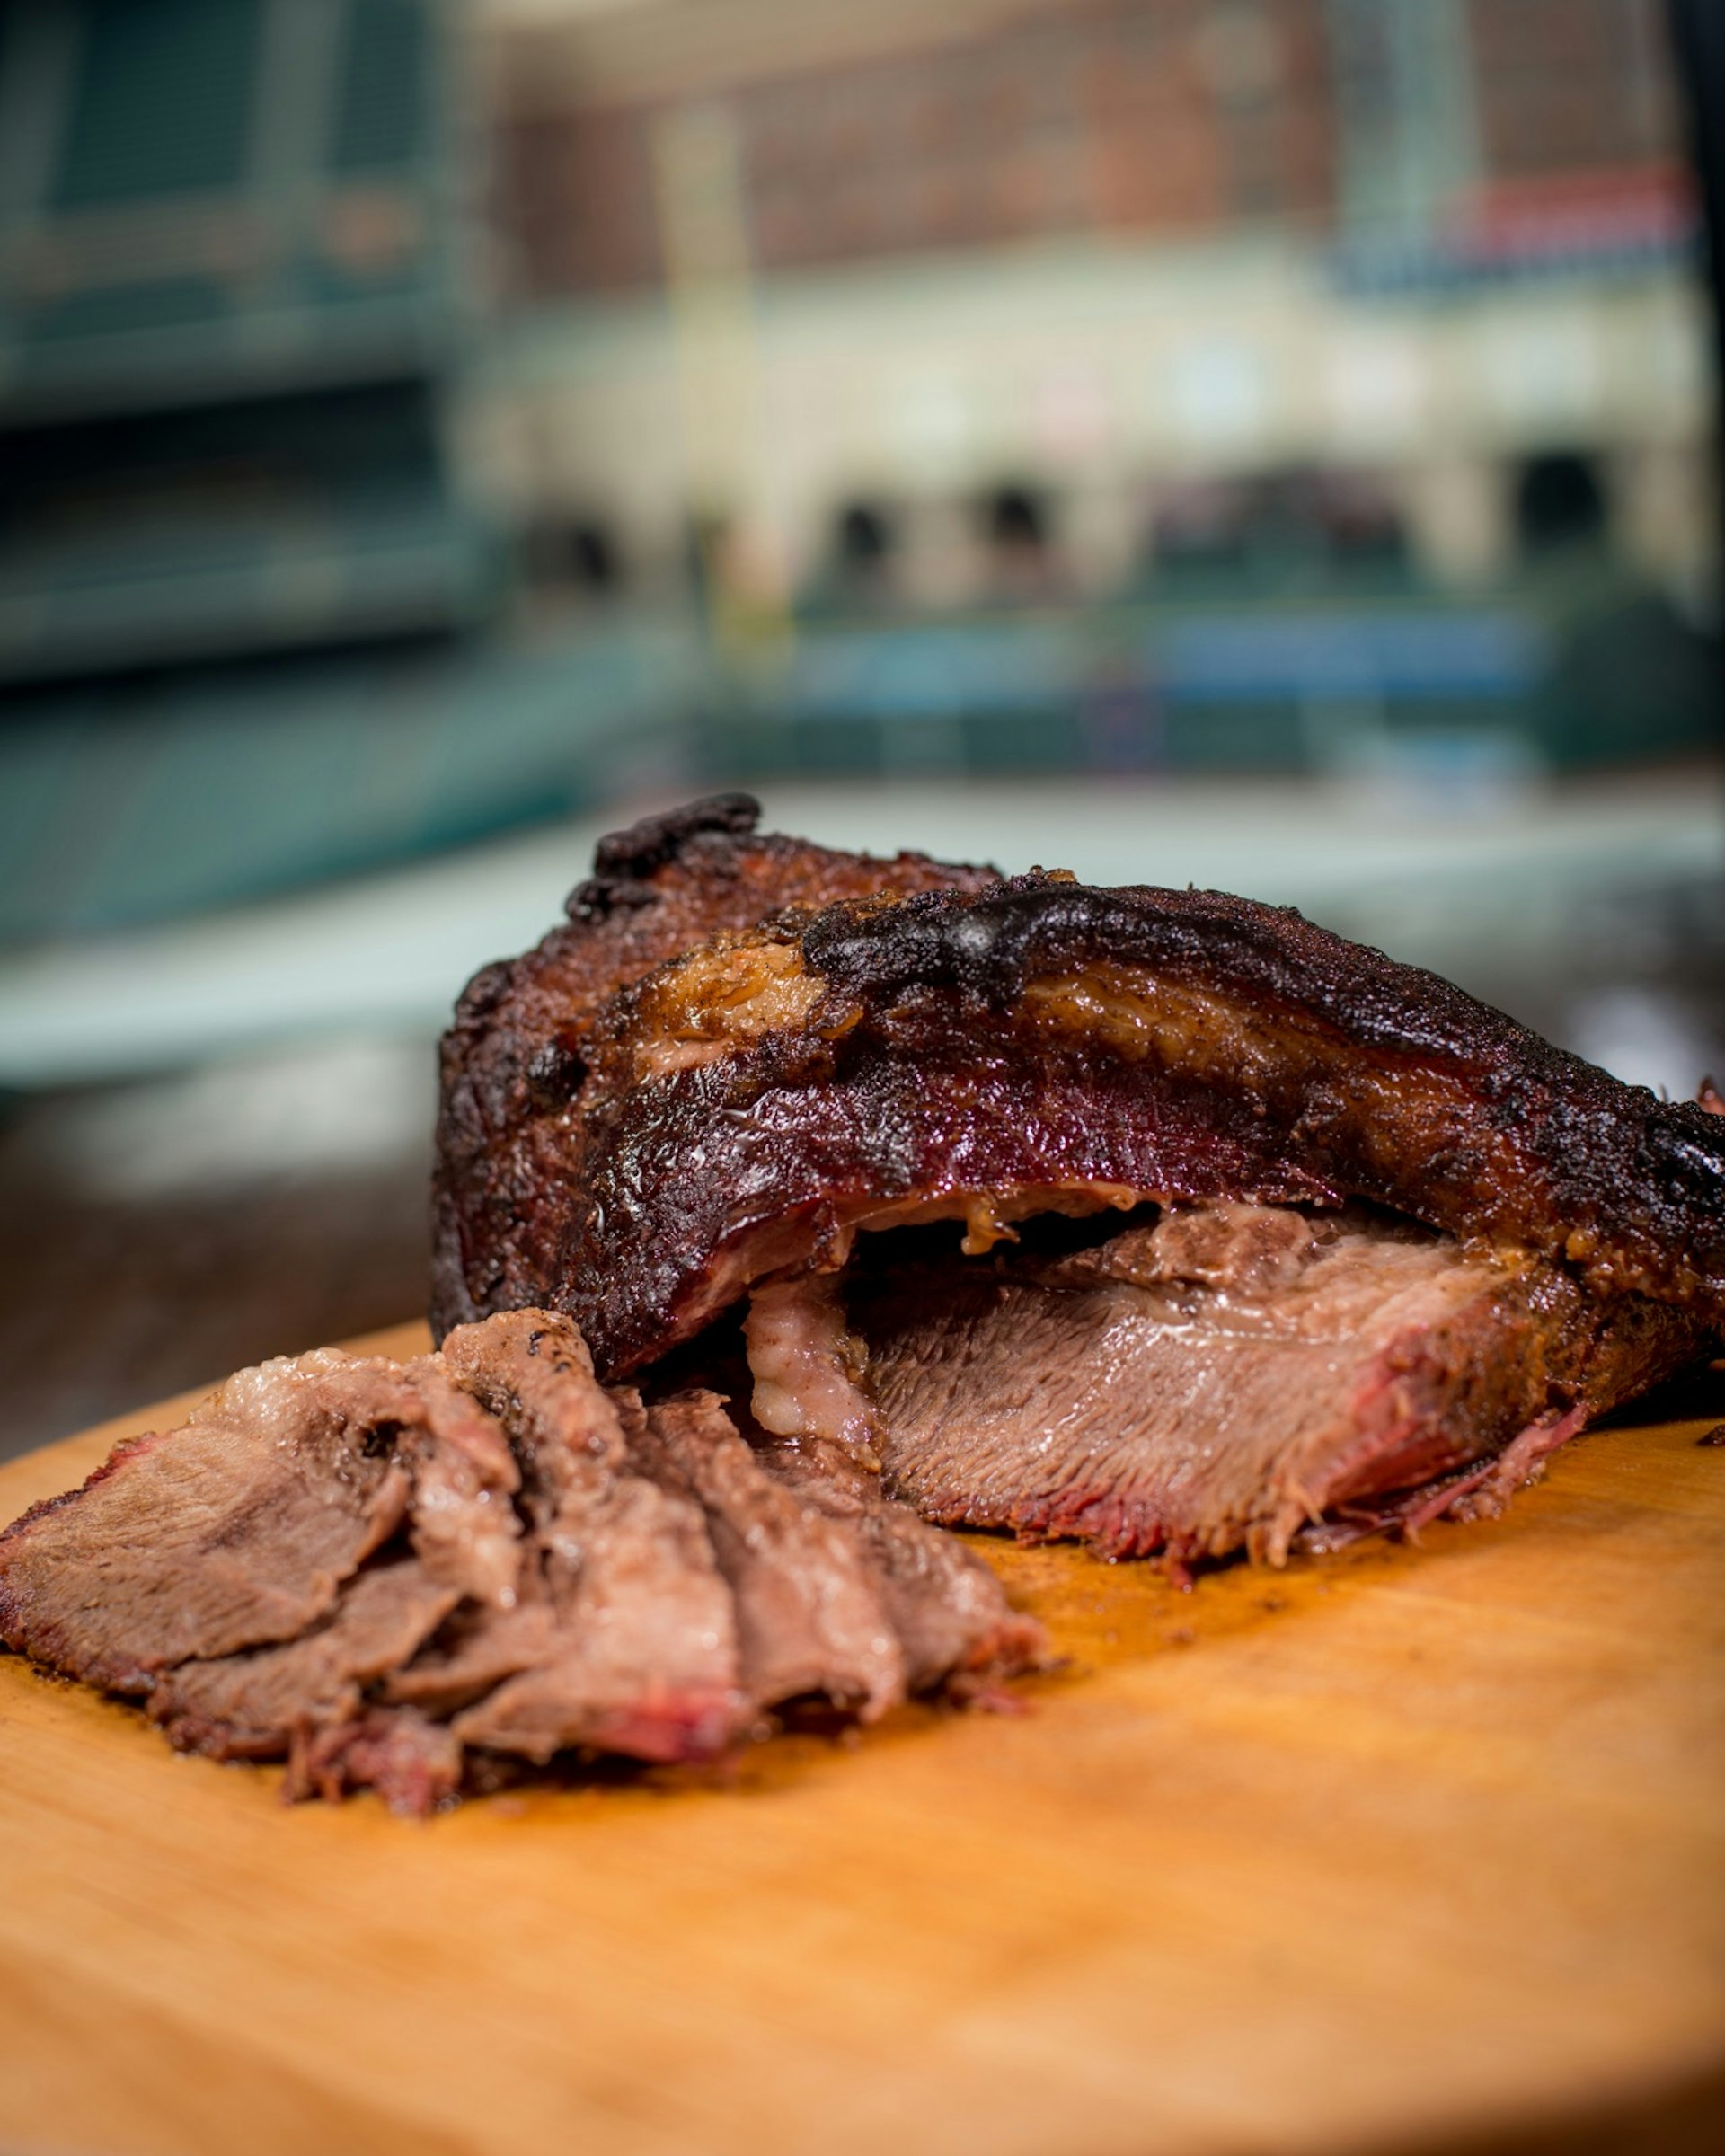 Smoked brisket sliced and fanned out on a wooden cutting board, the best kind of ballpark food